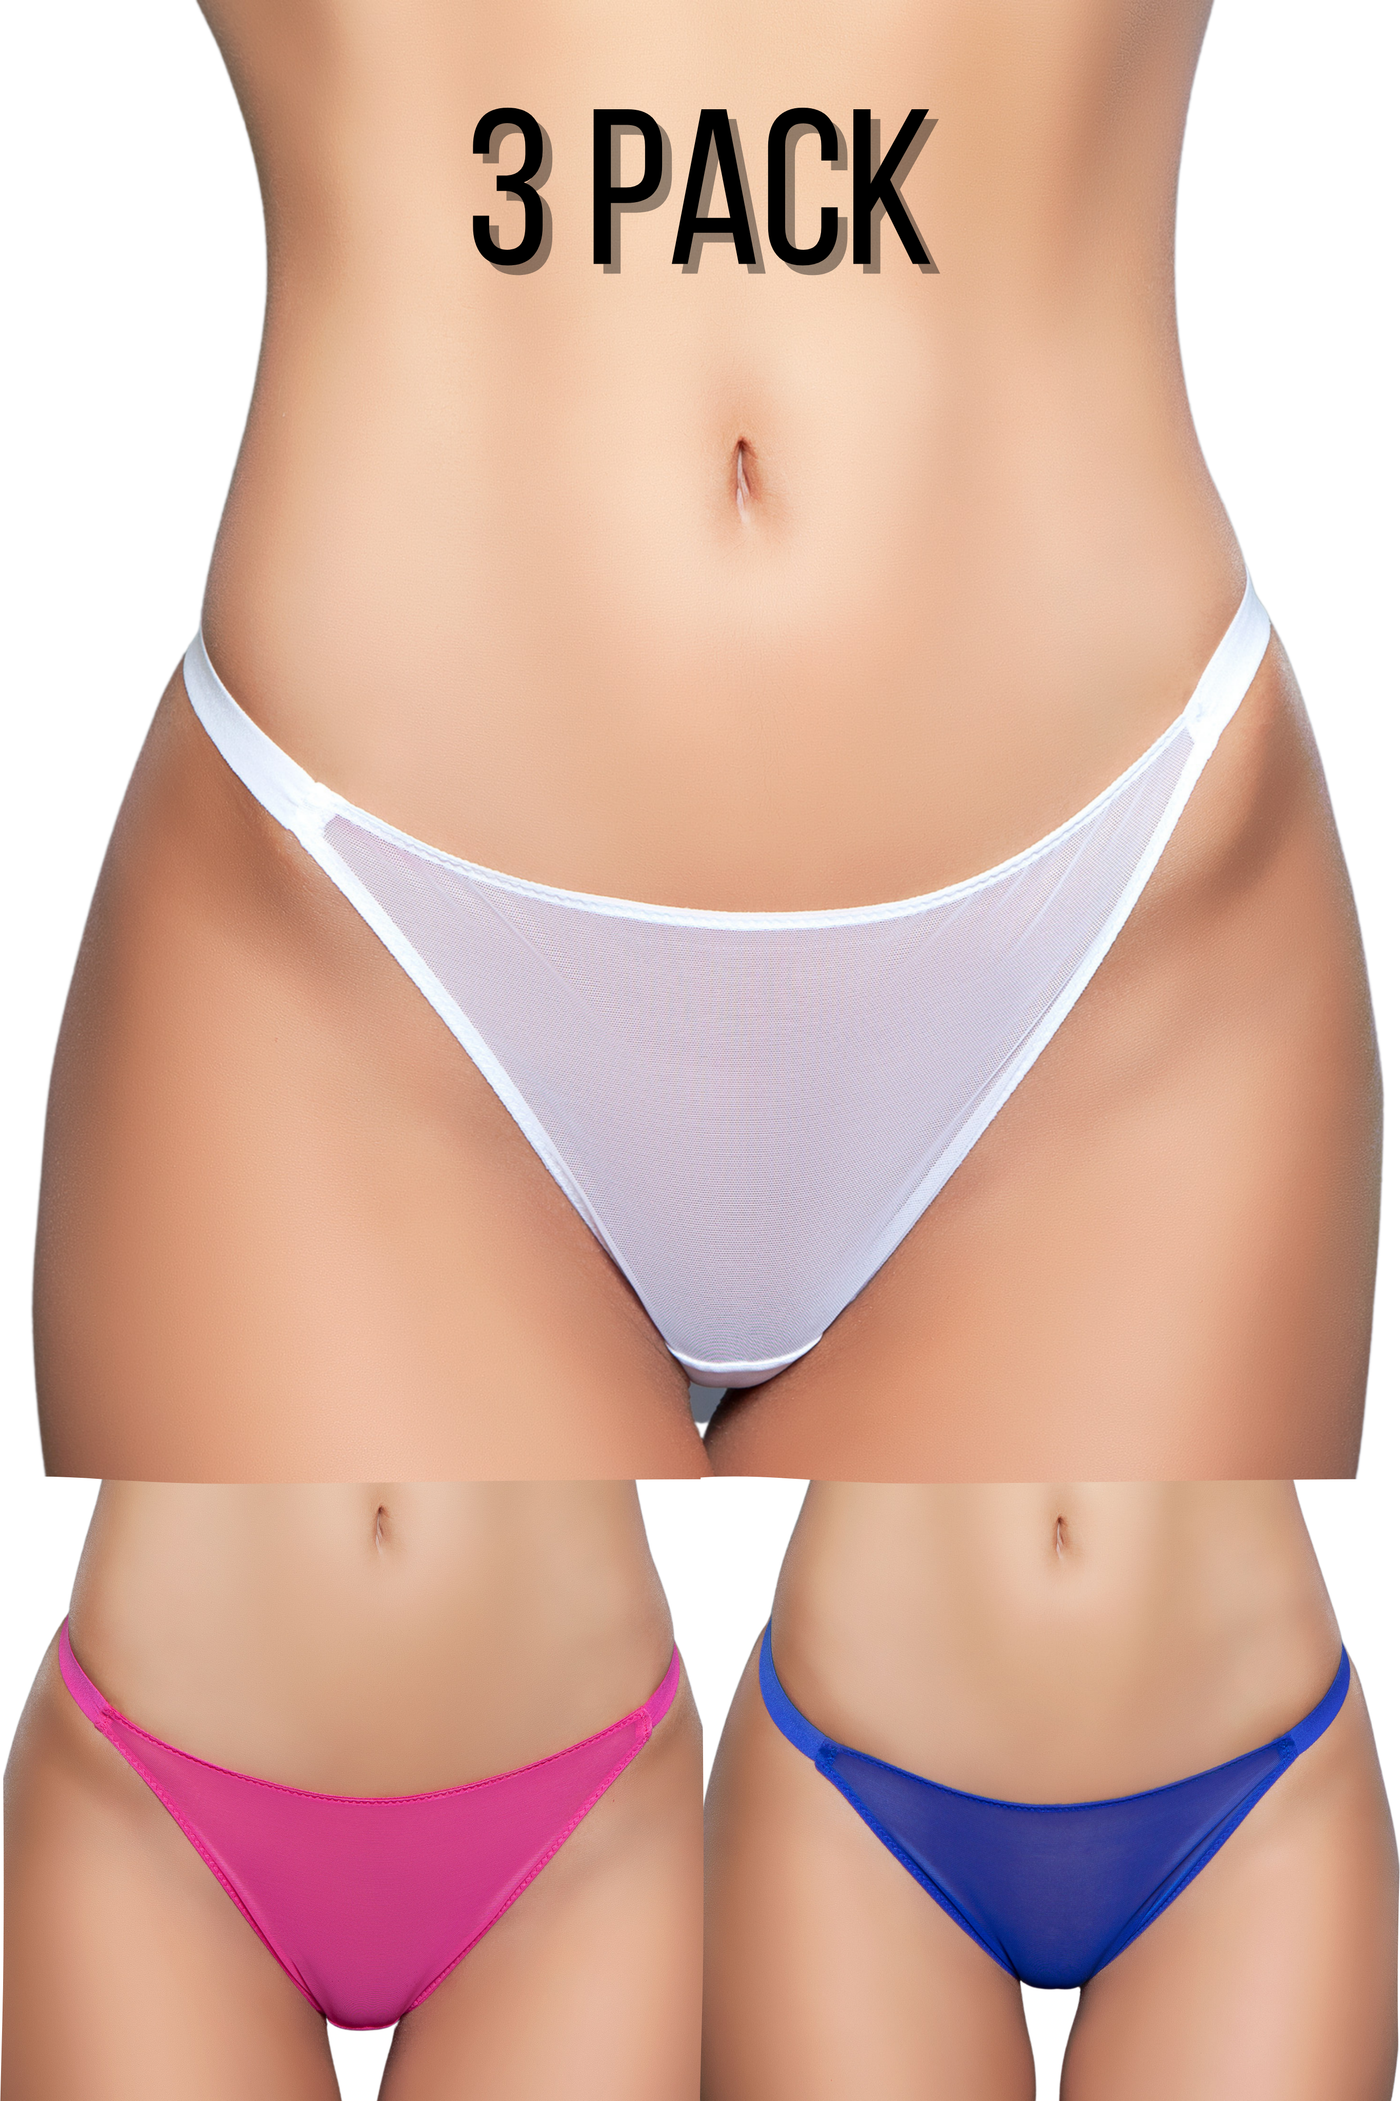 2102 Kayleigh Thong 3 Pack - For Love of Lingerie